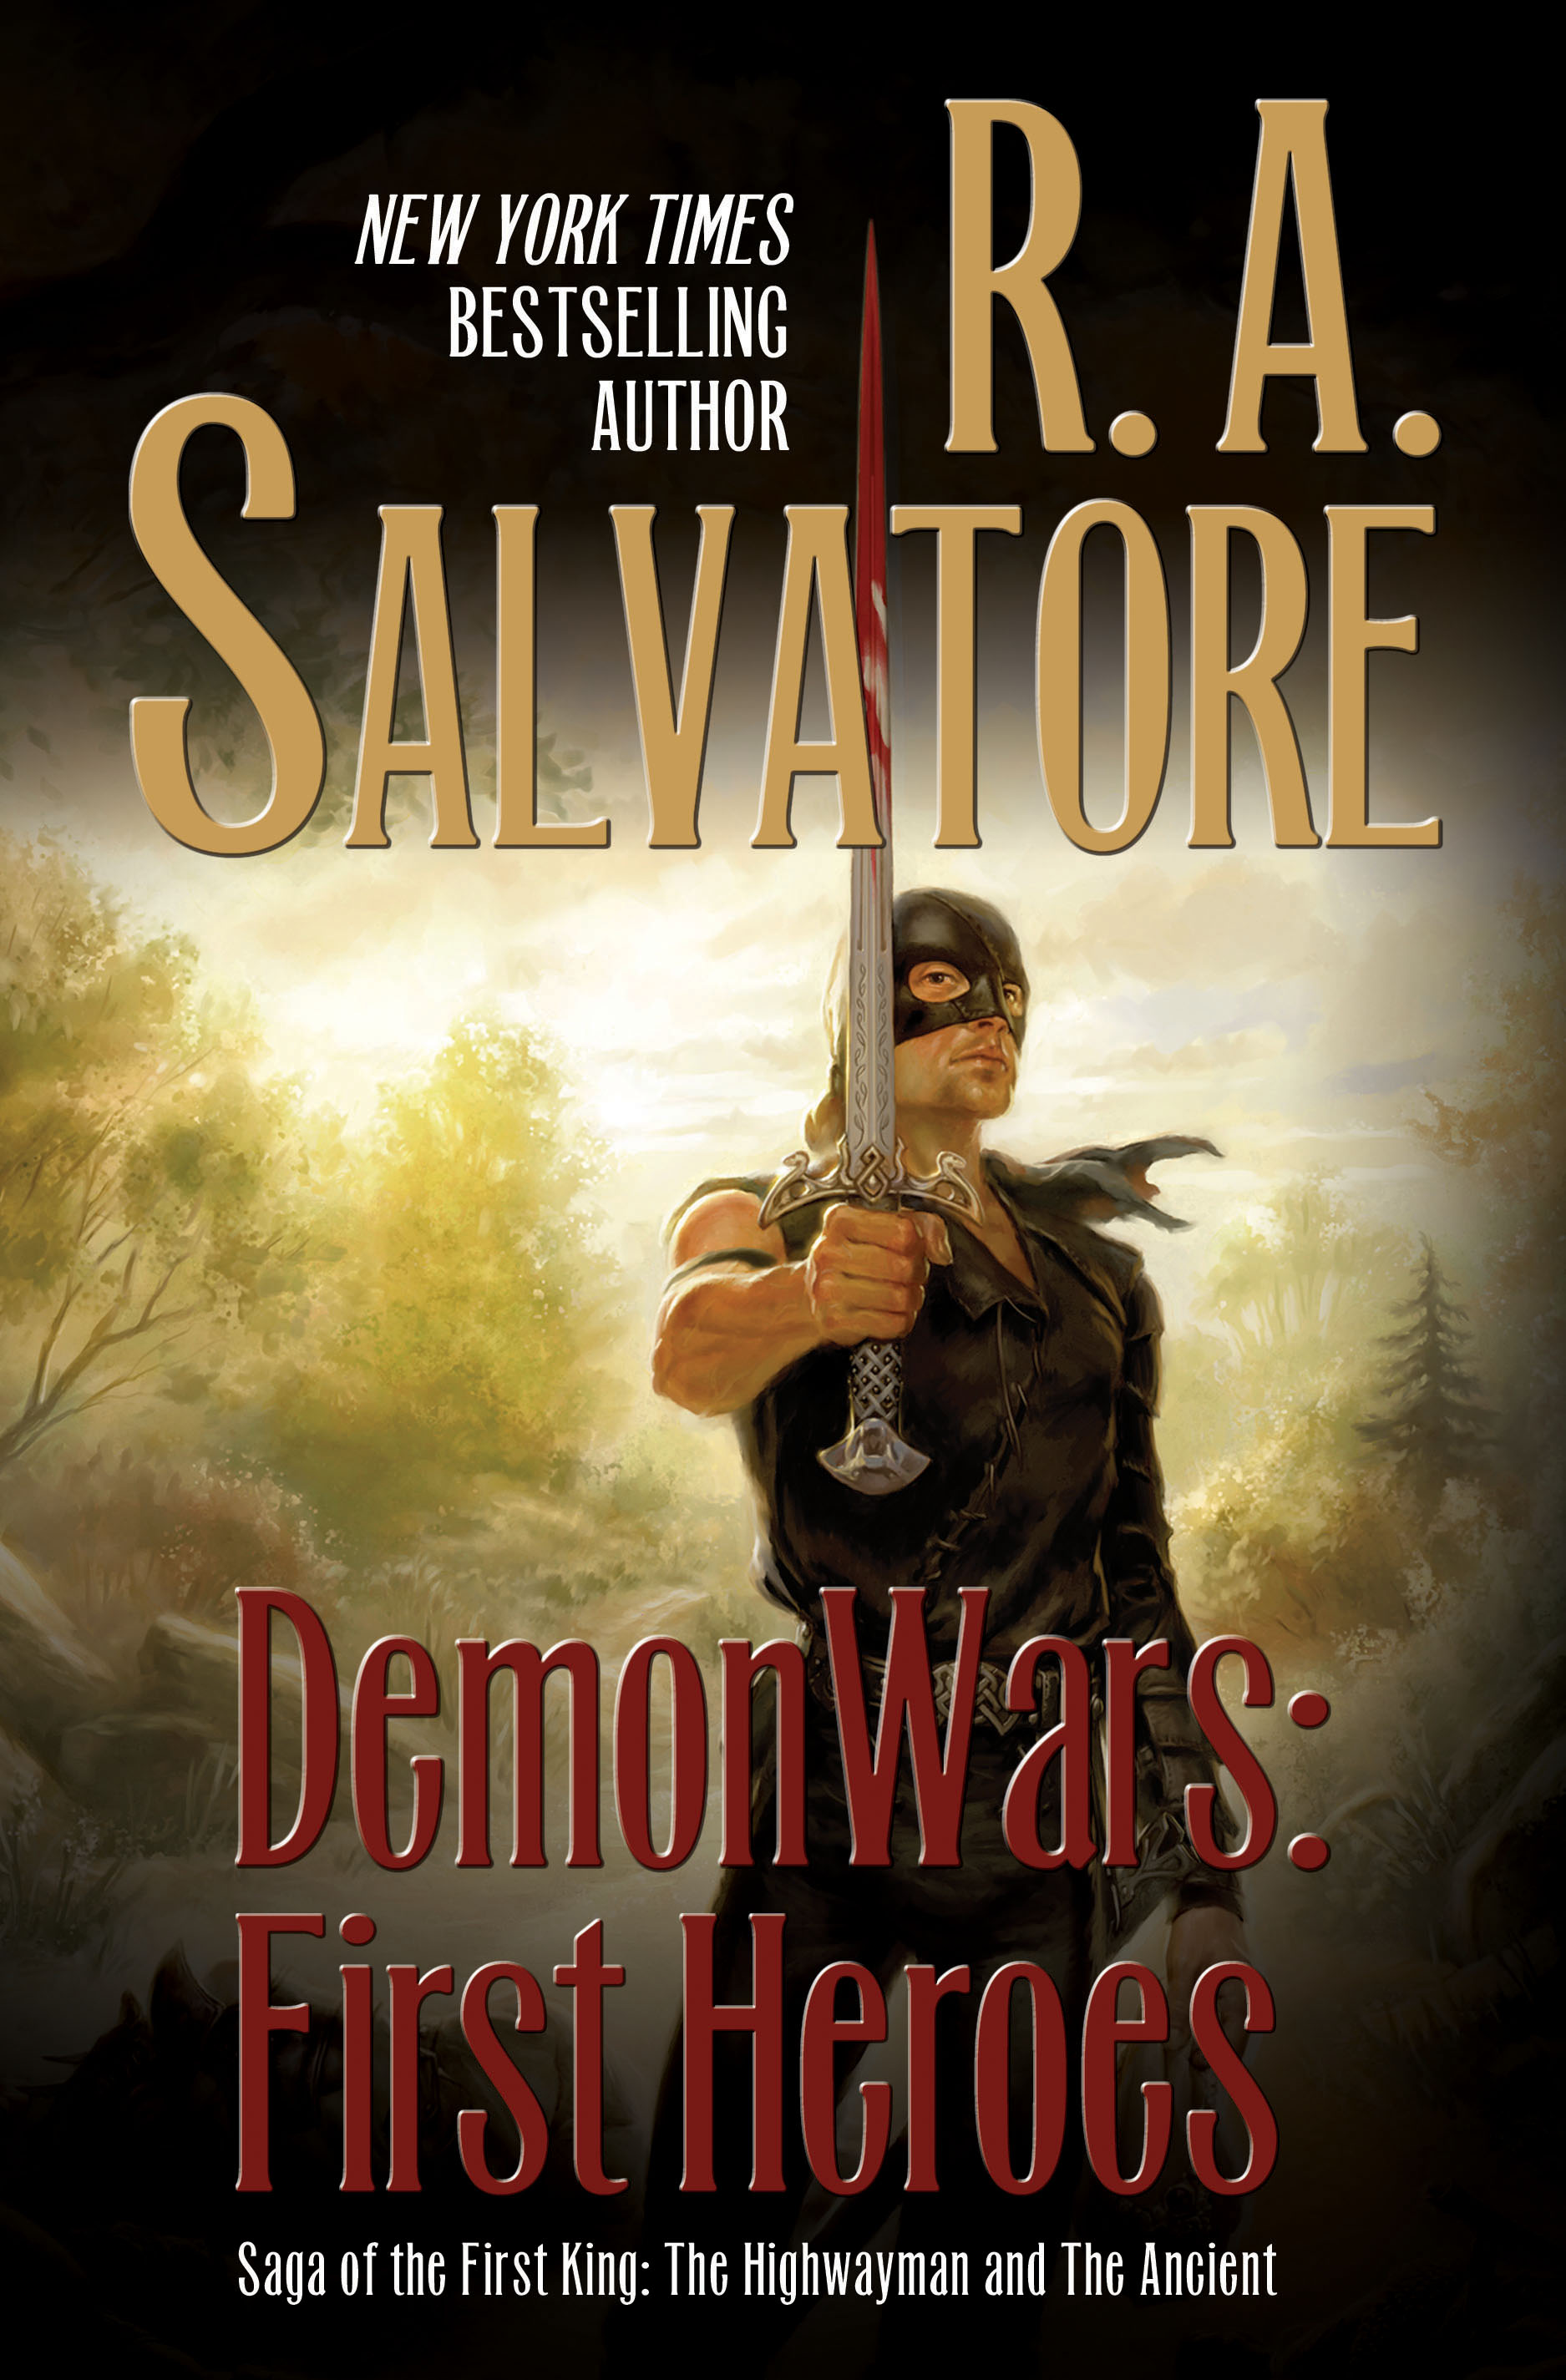 DemonWars: First Heroes : The Highwayman and The Ancient by R. A. Salvatore